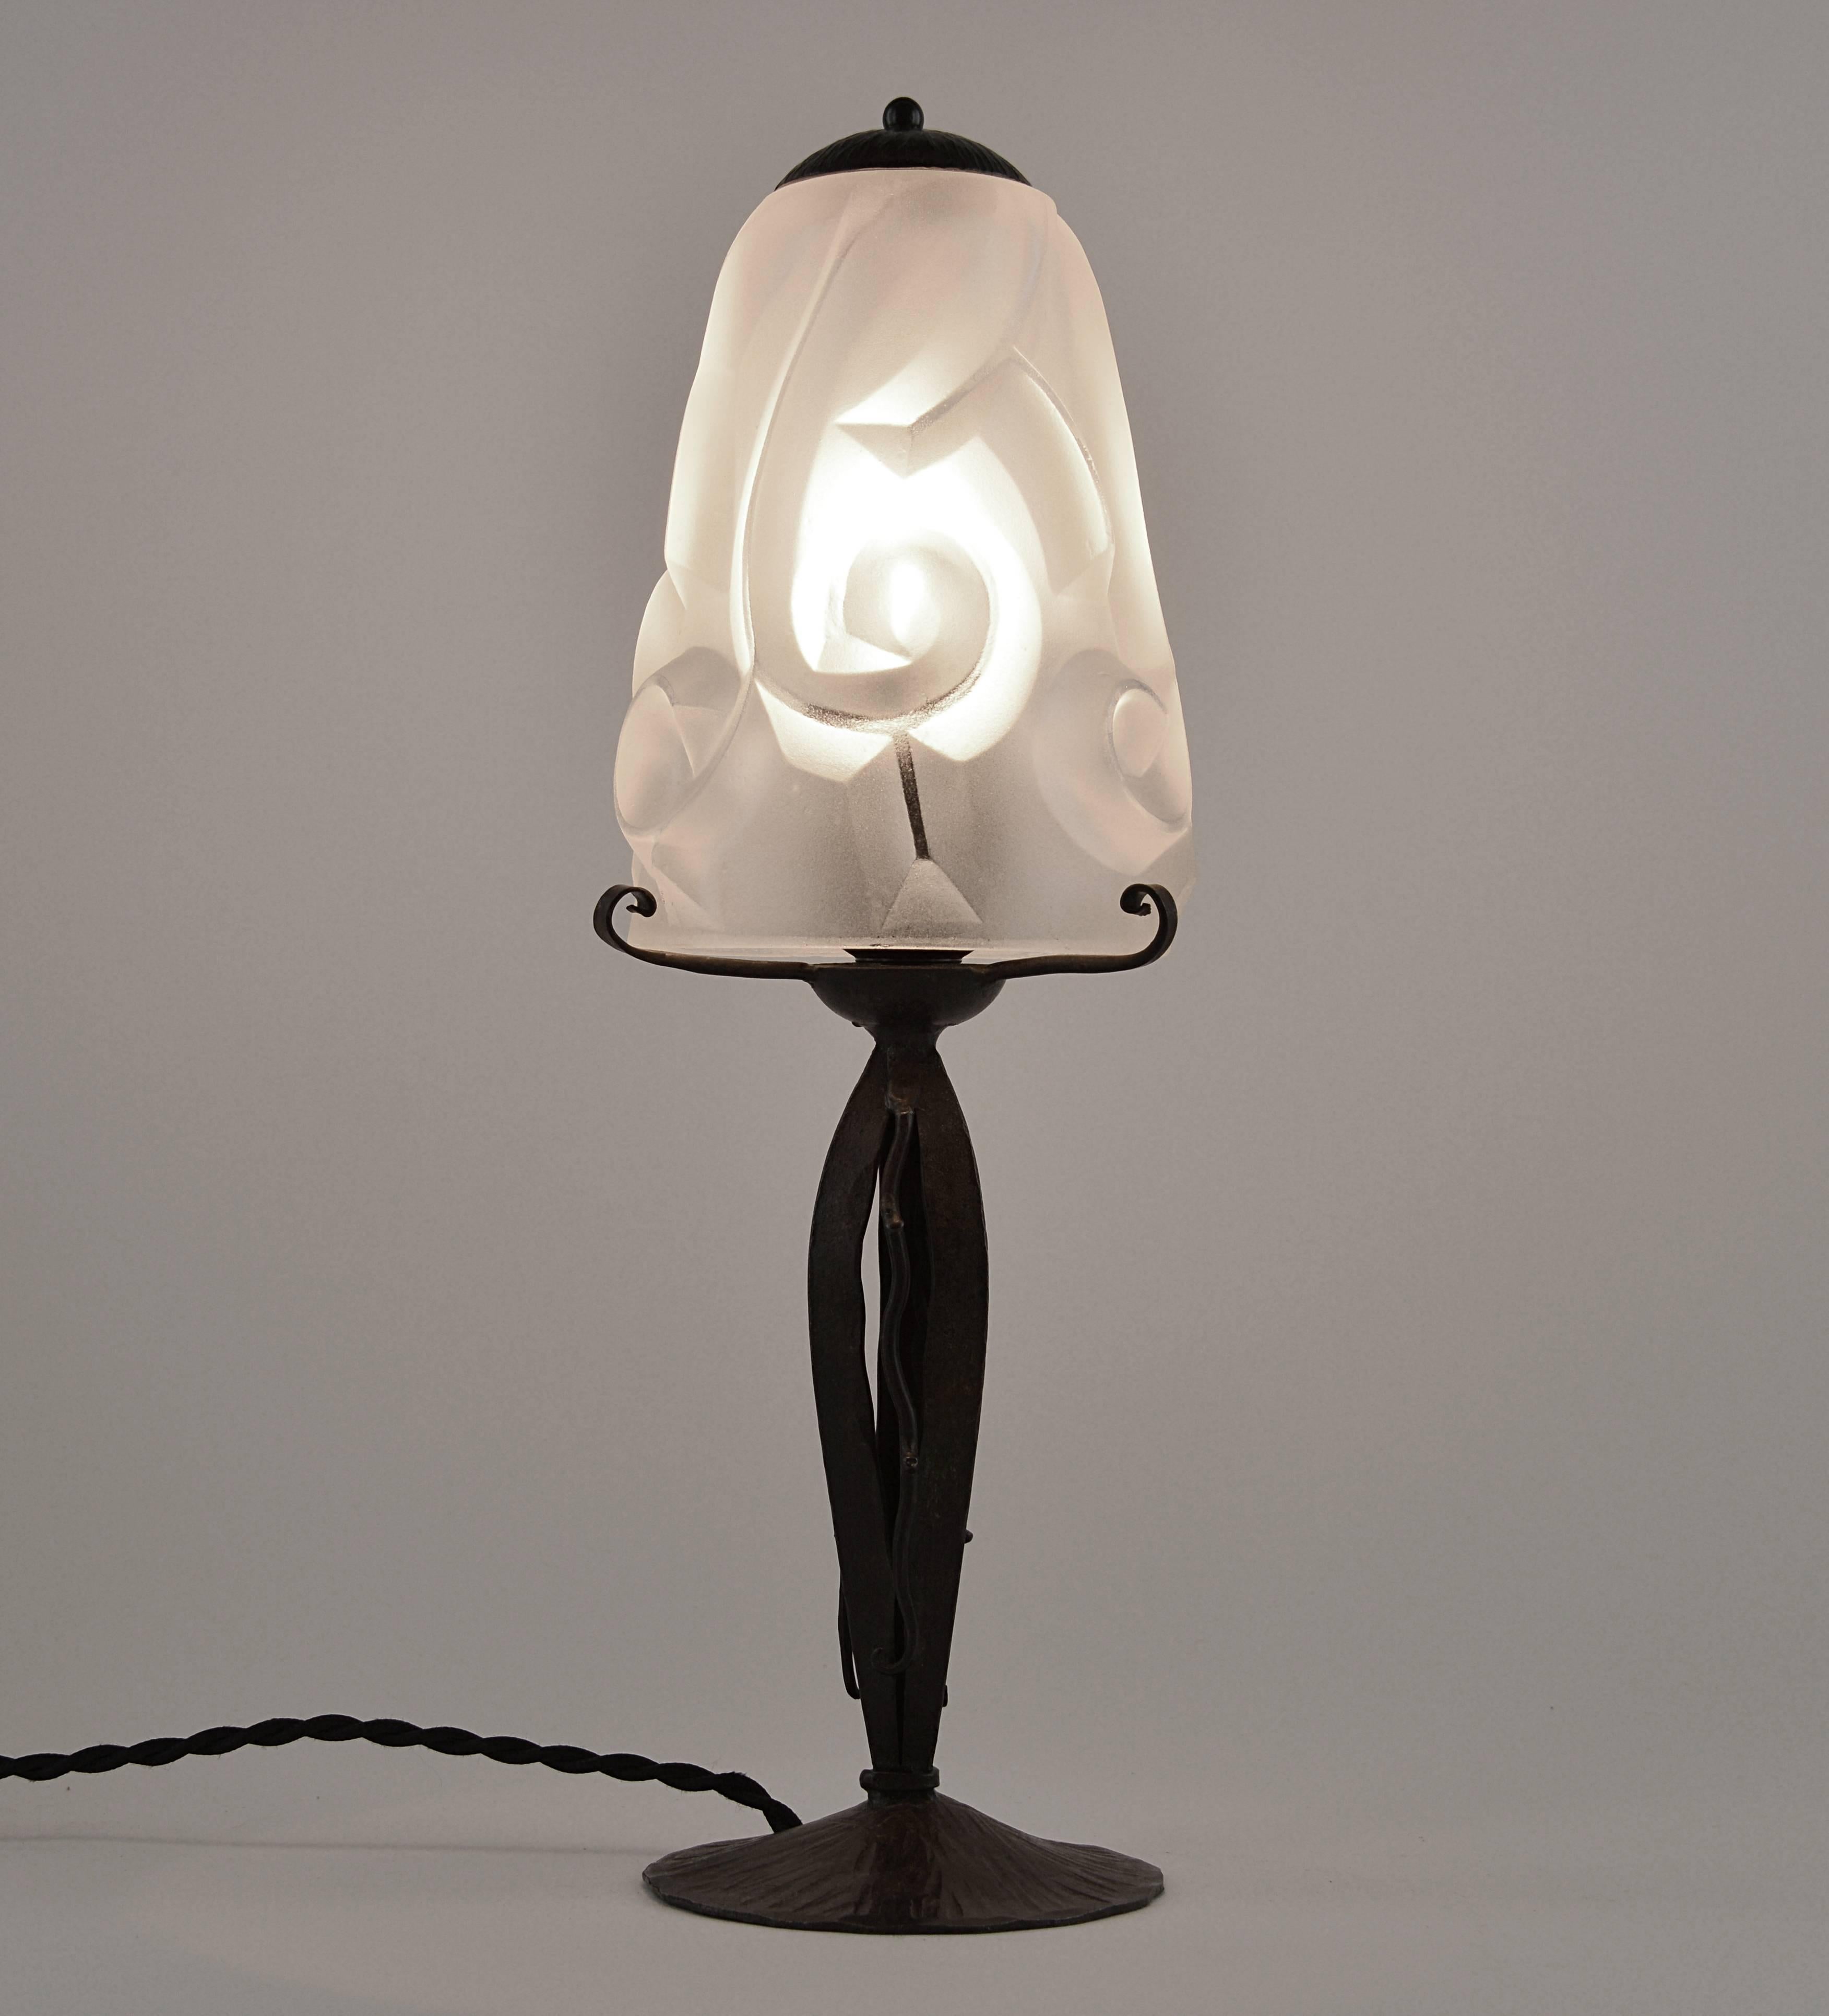 French Art Deco table lamp by Edouard Cazaux at Degue's, France, 1928-1930. Very thick molded glass shade. Superb wrought iron base. The best by Degue! The Degue of the Normandy liner. Delivered wired for your country.

About Edouard Cazaux